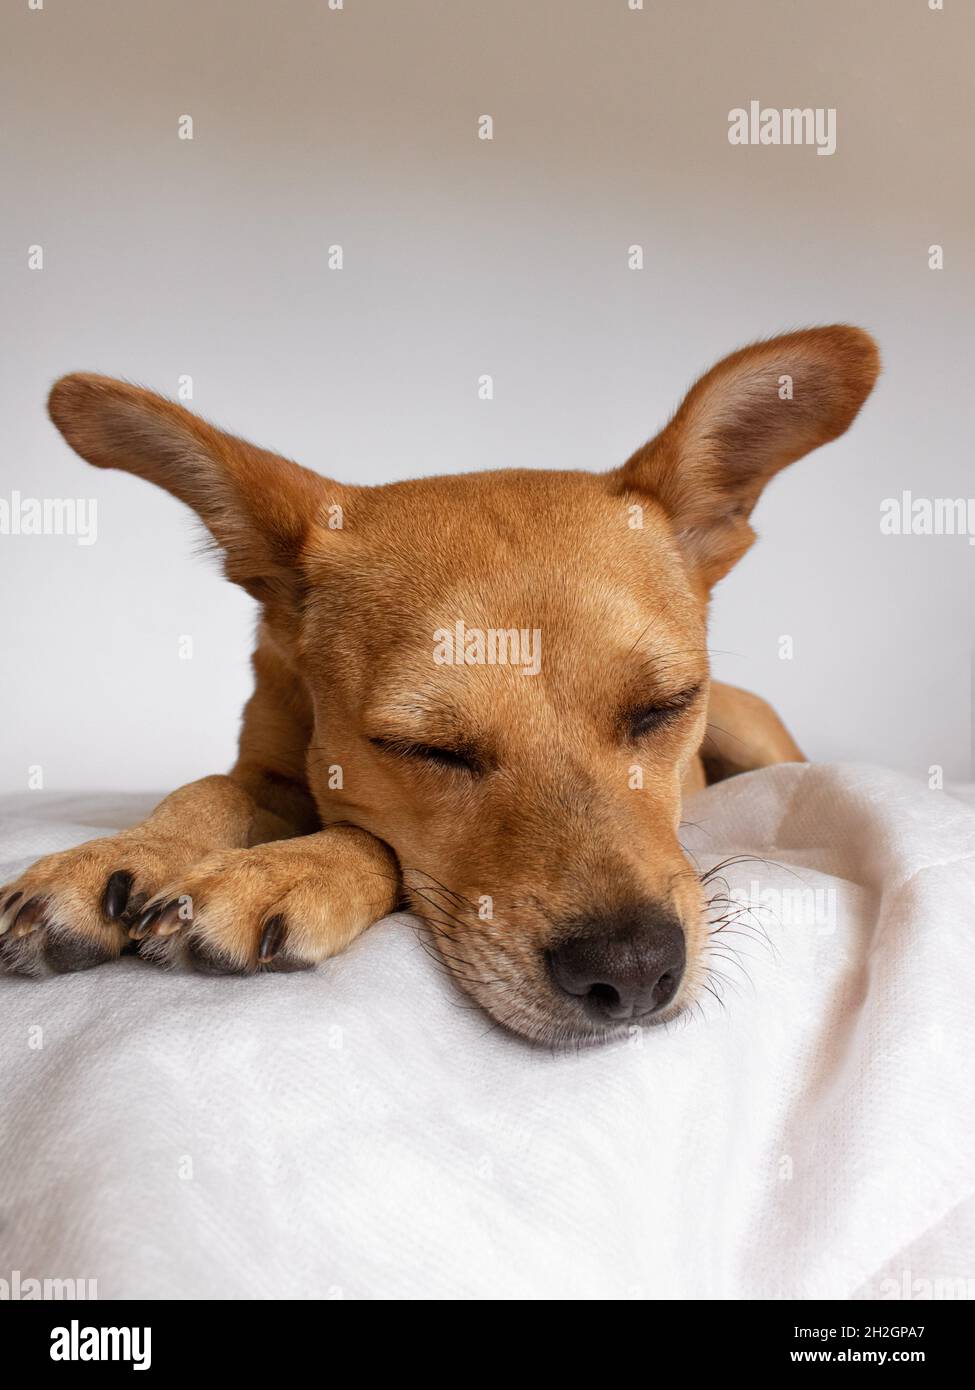 A cute mixed-breed dog with ears up sleeping comfortably on a soft white blanket. Close-up on dog's face in front of the camera with space for text Stock Photo